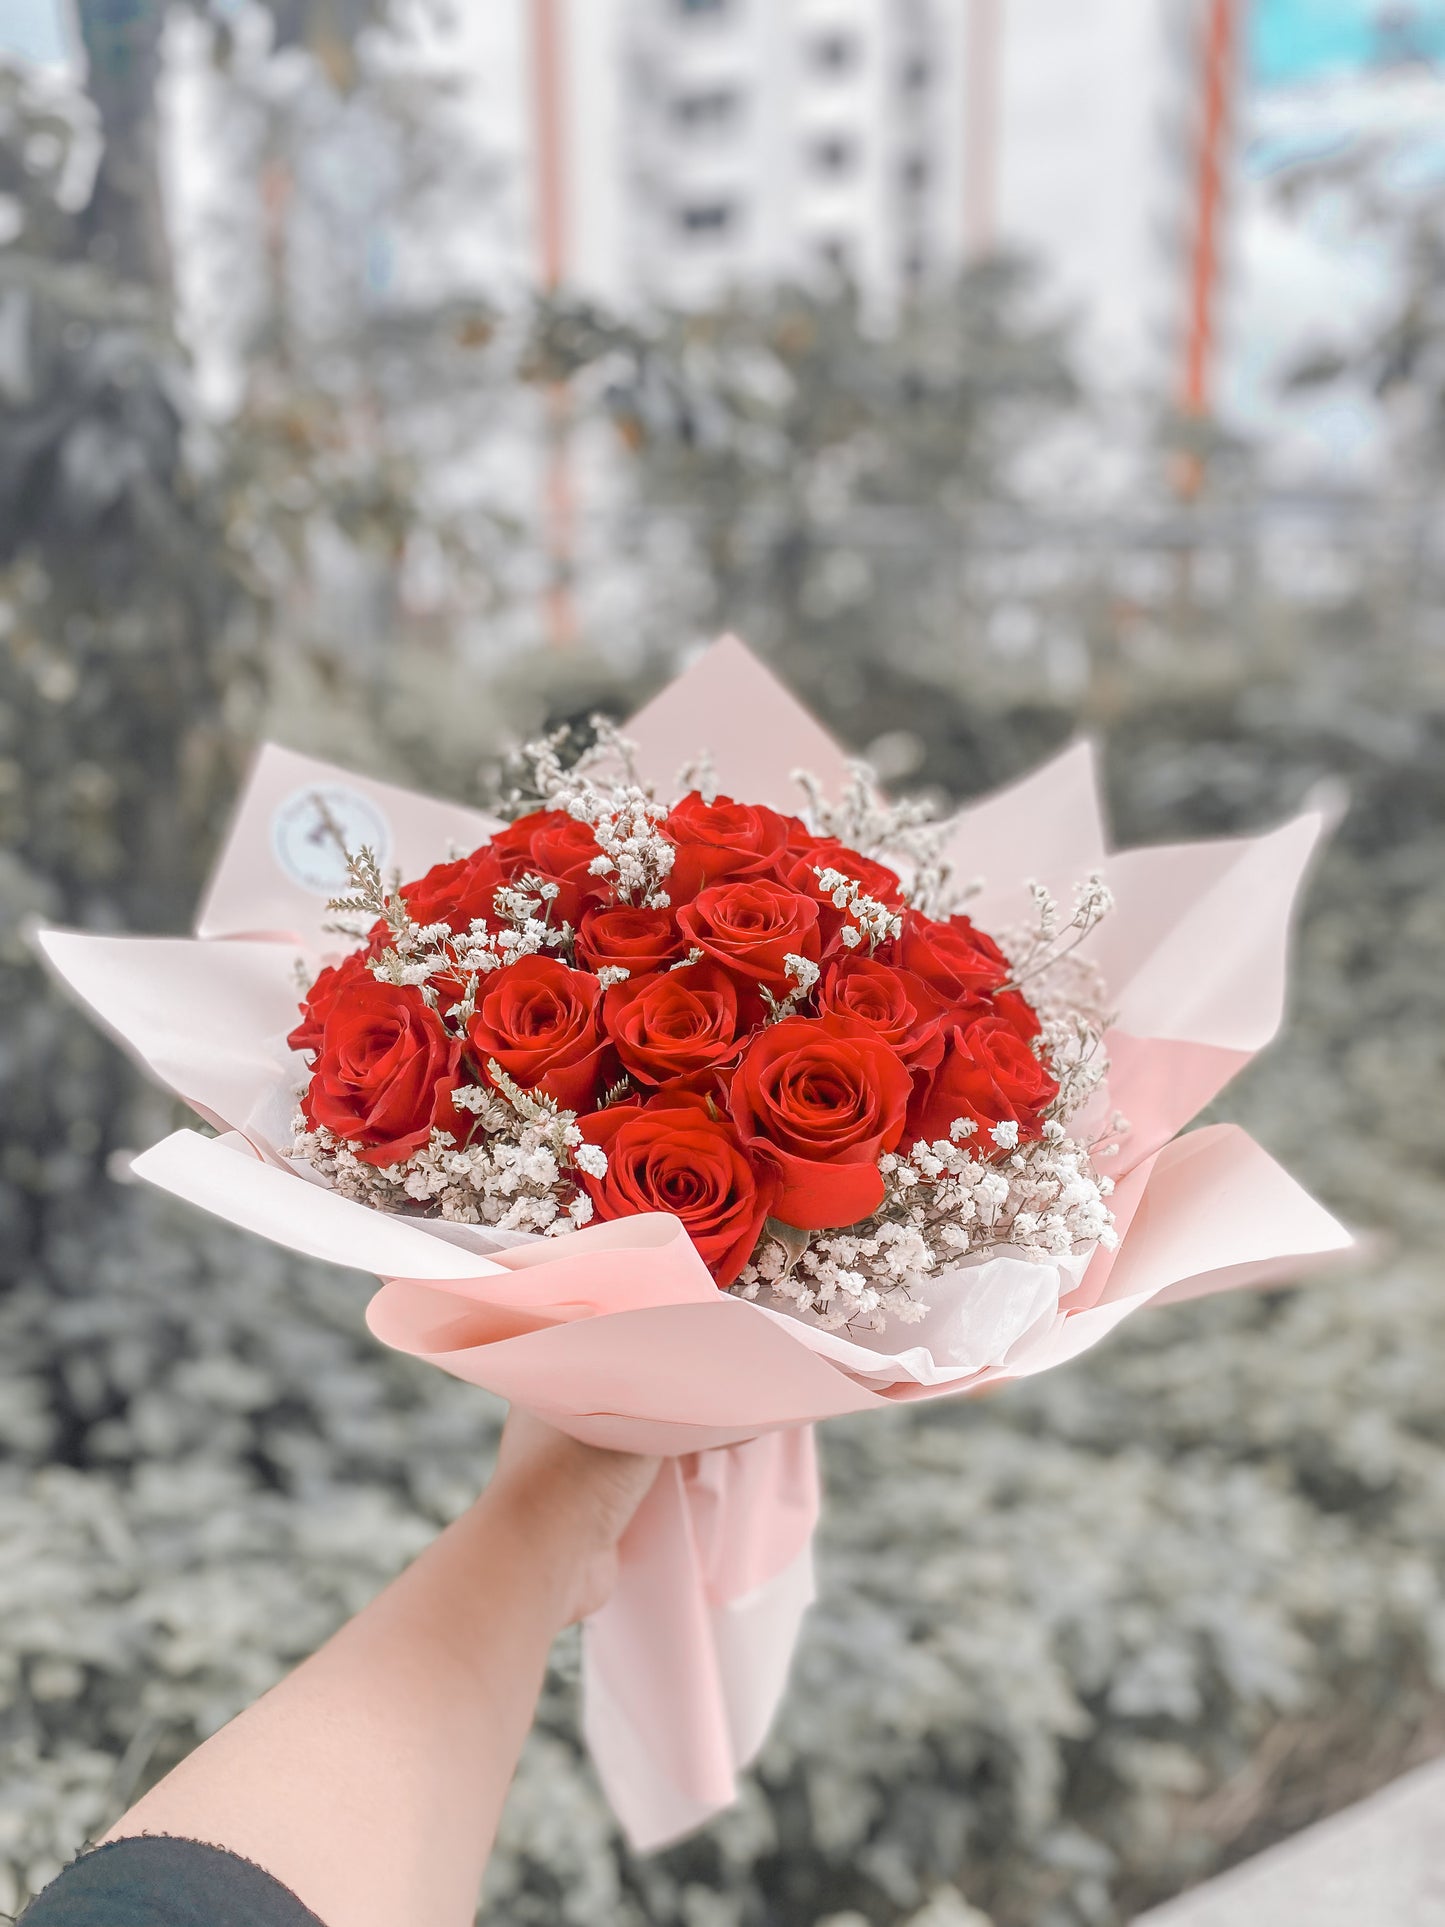 Any Day FloristBeautiful combinations of lilies from holland and garden roses perfect gift for all the mothers out there!
*Please note that our selection of flowers may differ slig30 Stalk Red Rose Bouquet